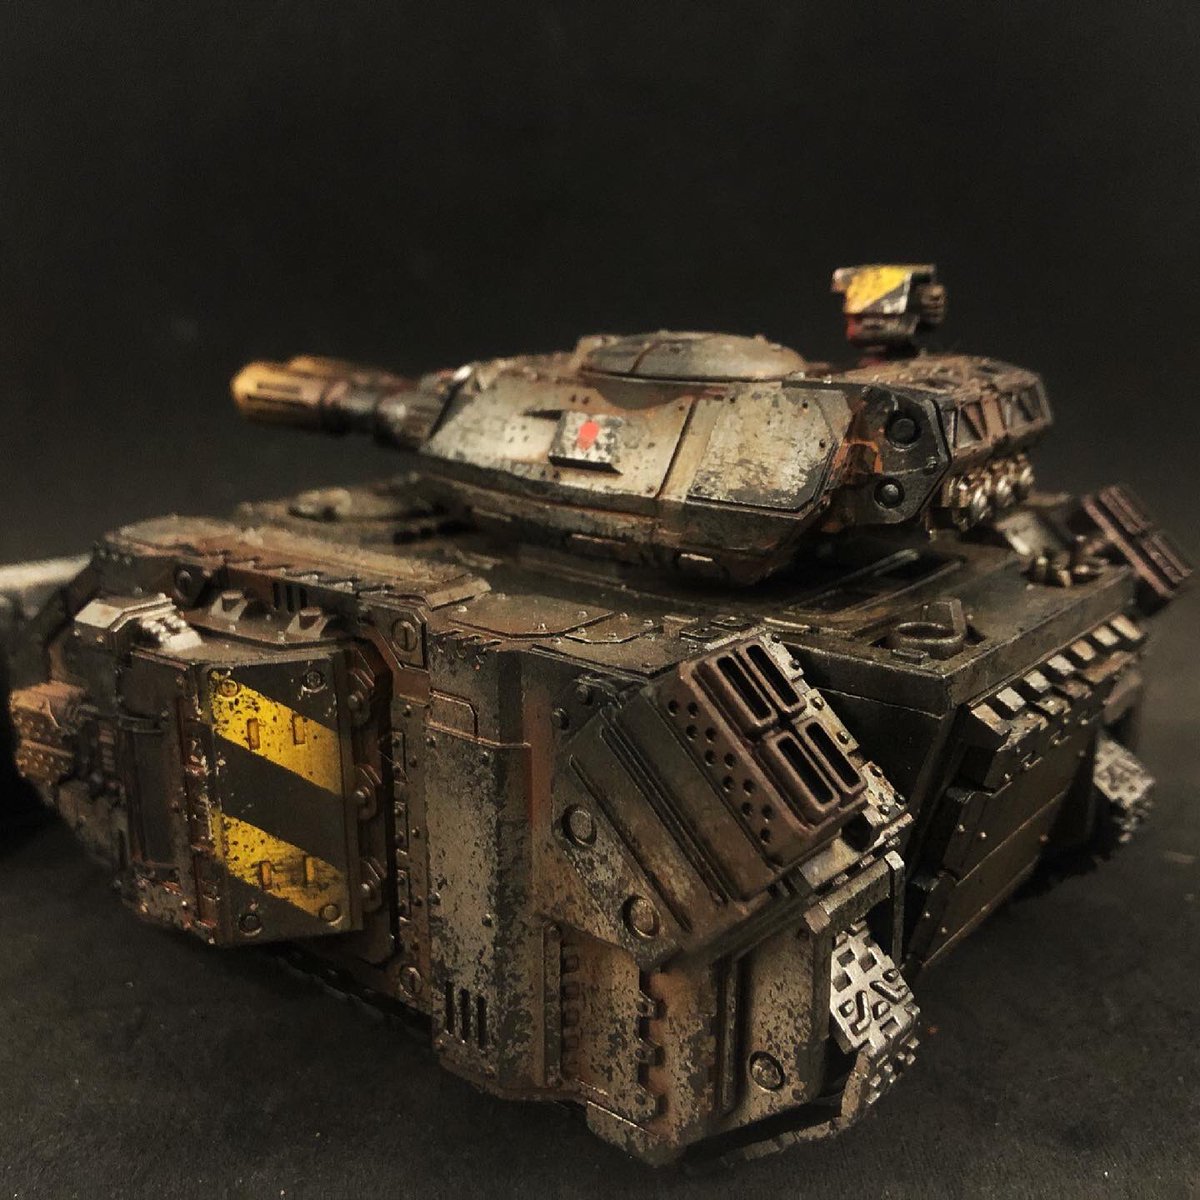 Iron warriors rhino count as. This has kromlech upgrade bits on it. #warmongers